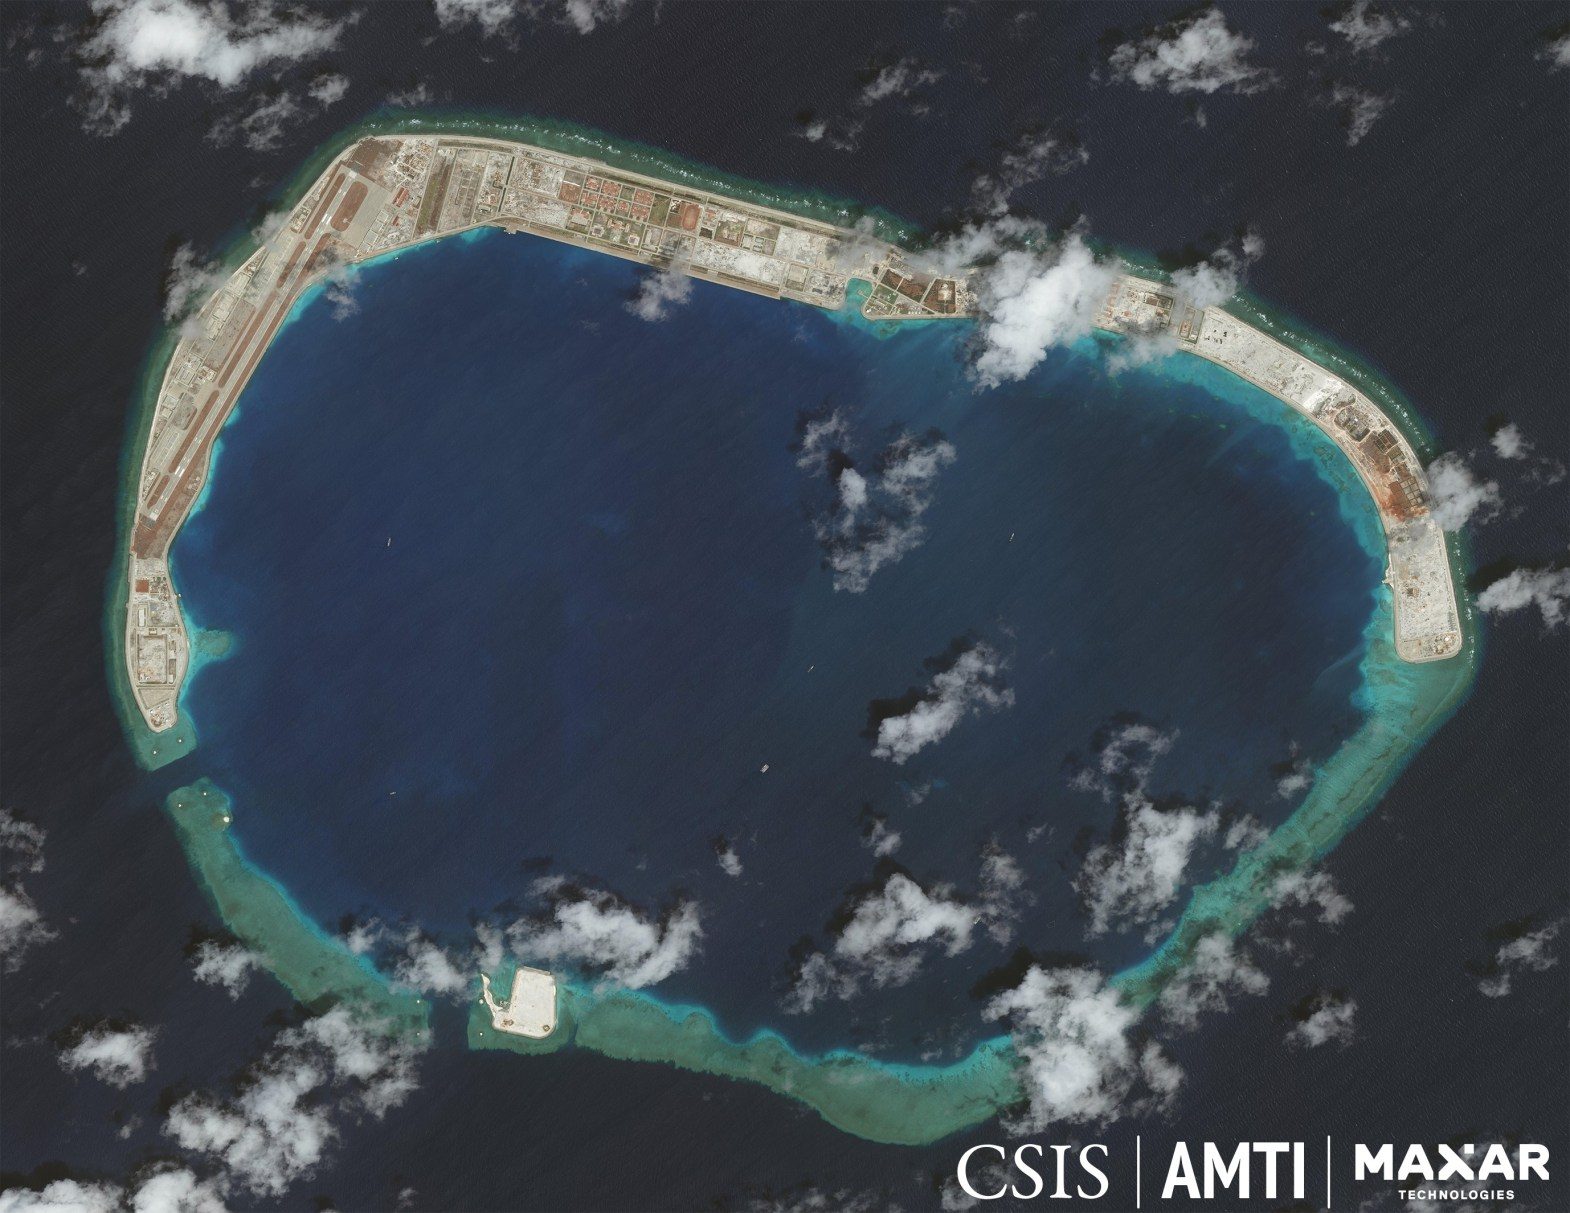 In 2020, the world corners China in the South China Sea